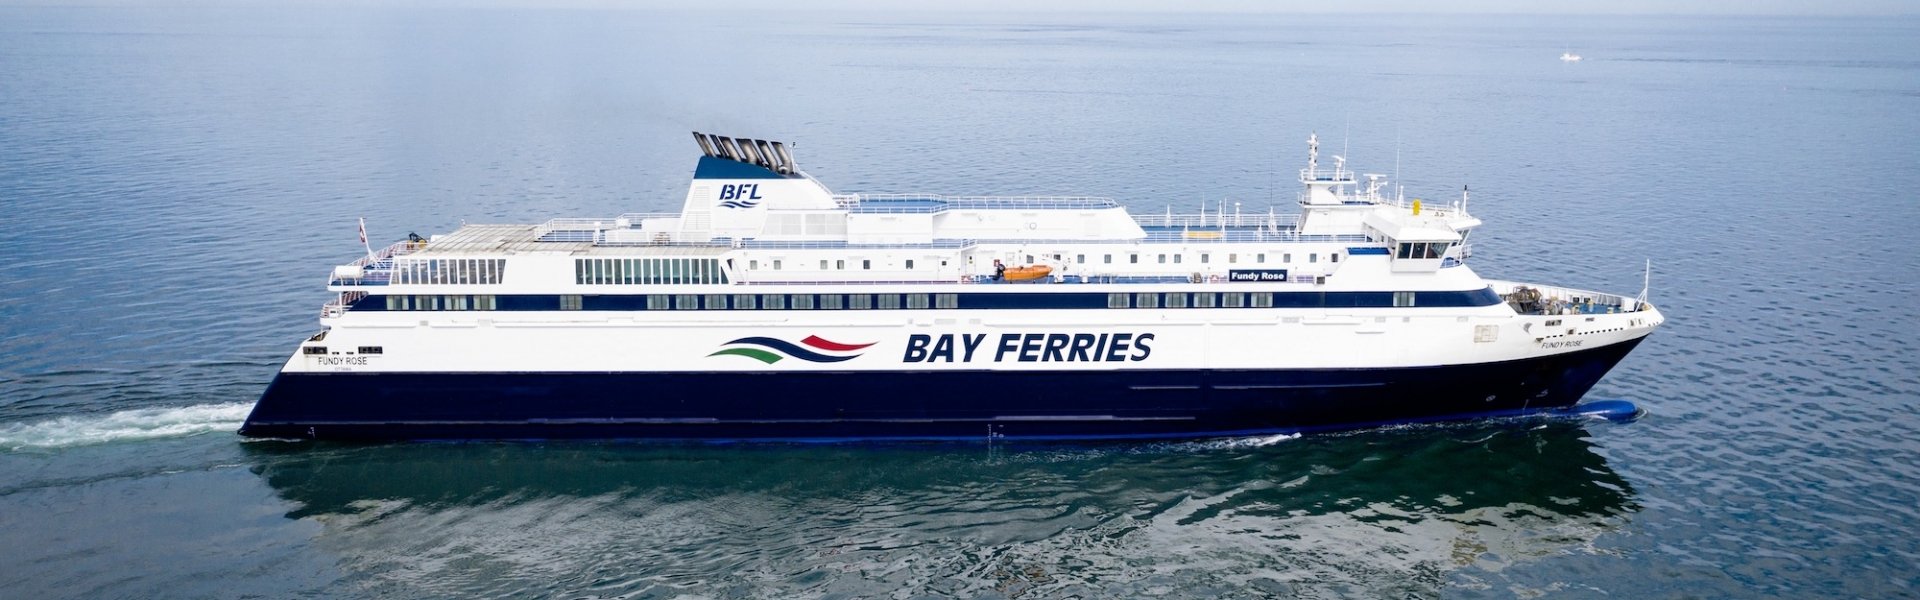 General Information & History of the Fundy Rose | Bay Ferries Ltd